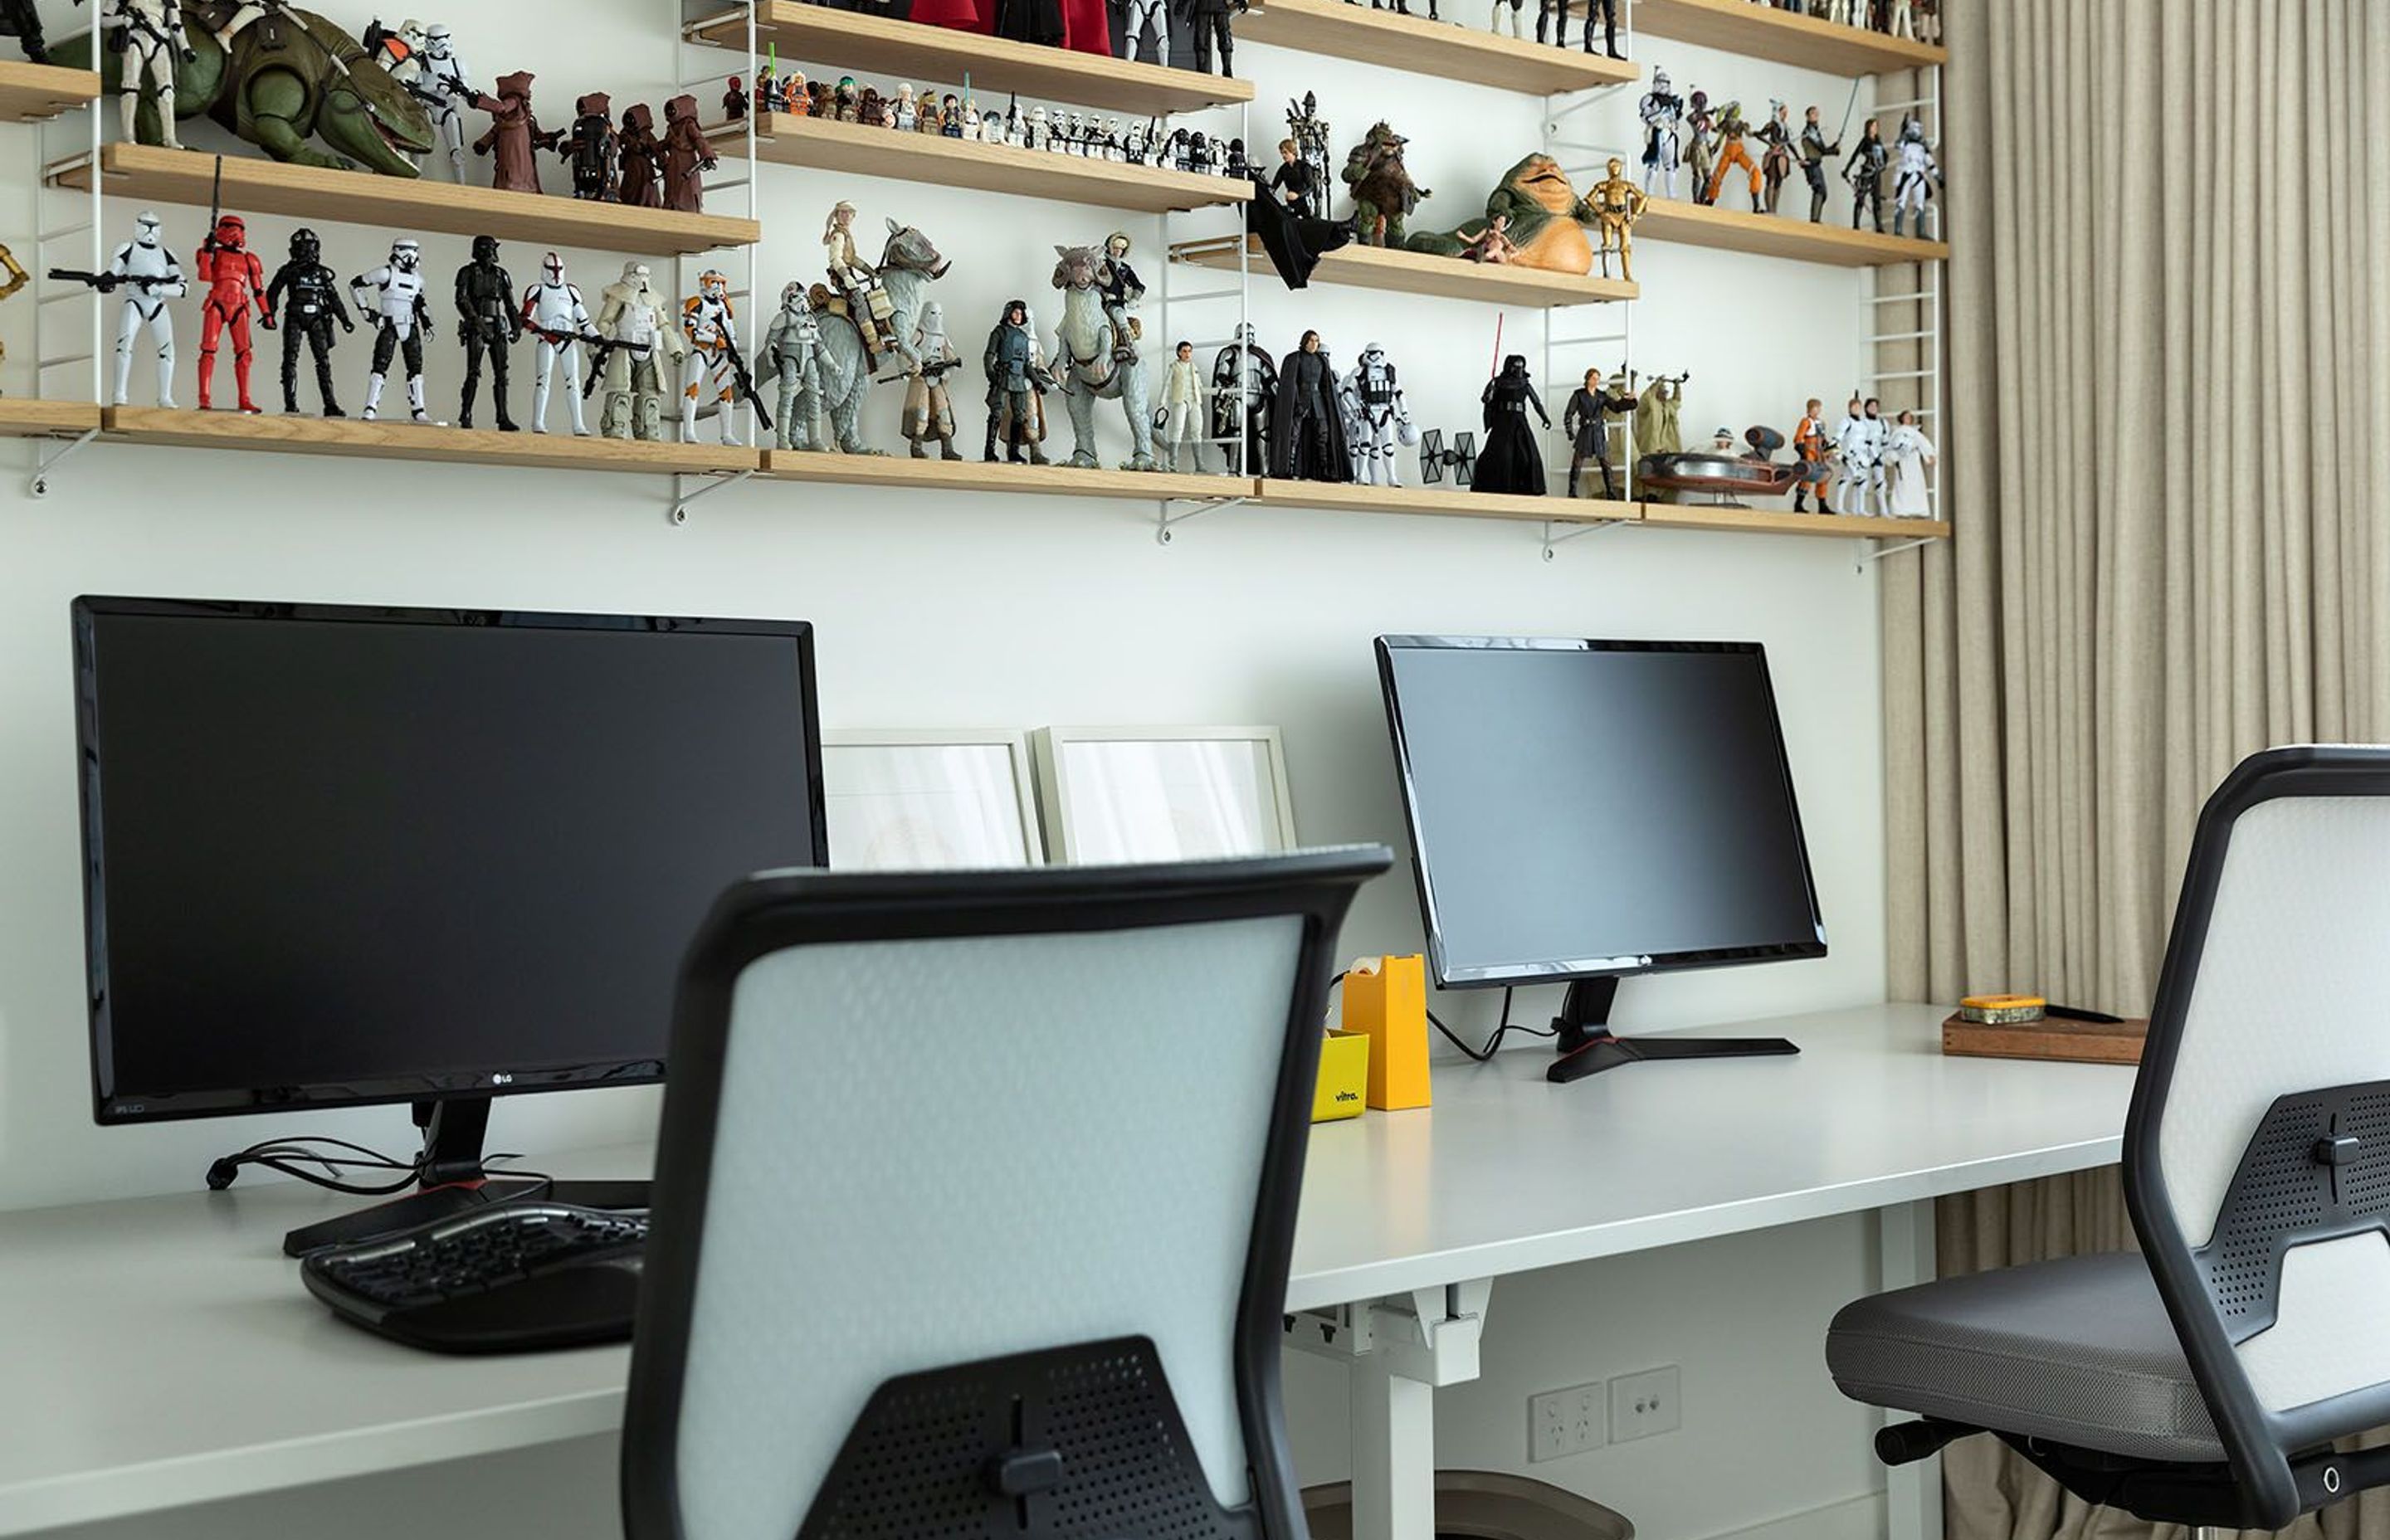 The upstairs' study/office features a collection of Star Wars figurines.